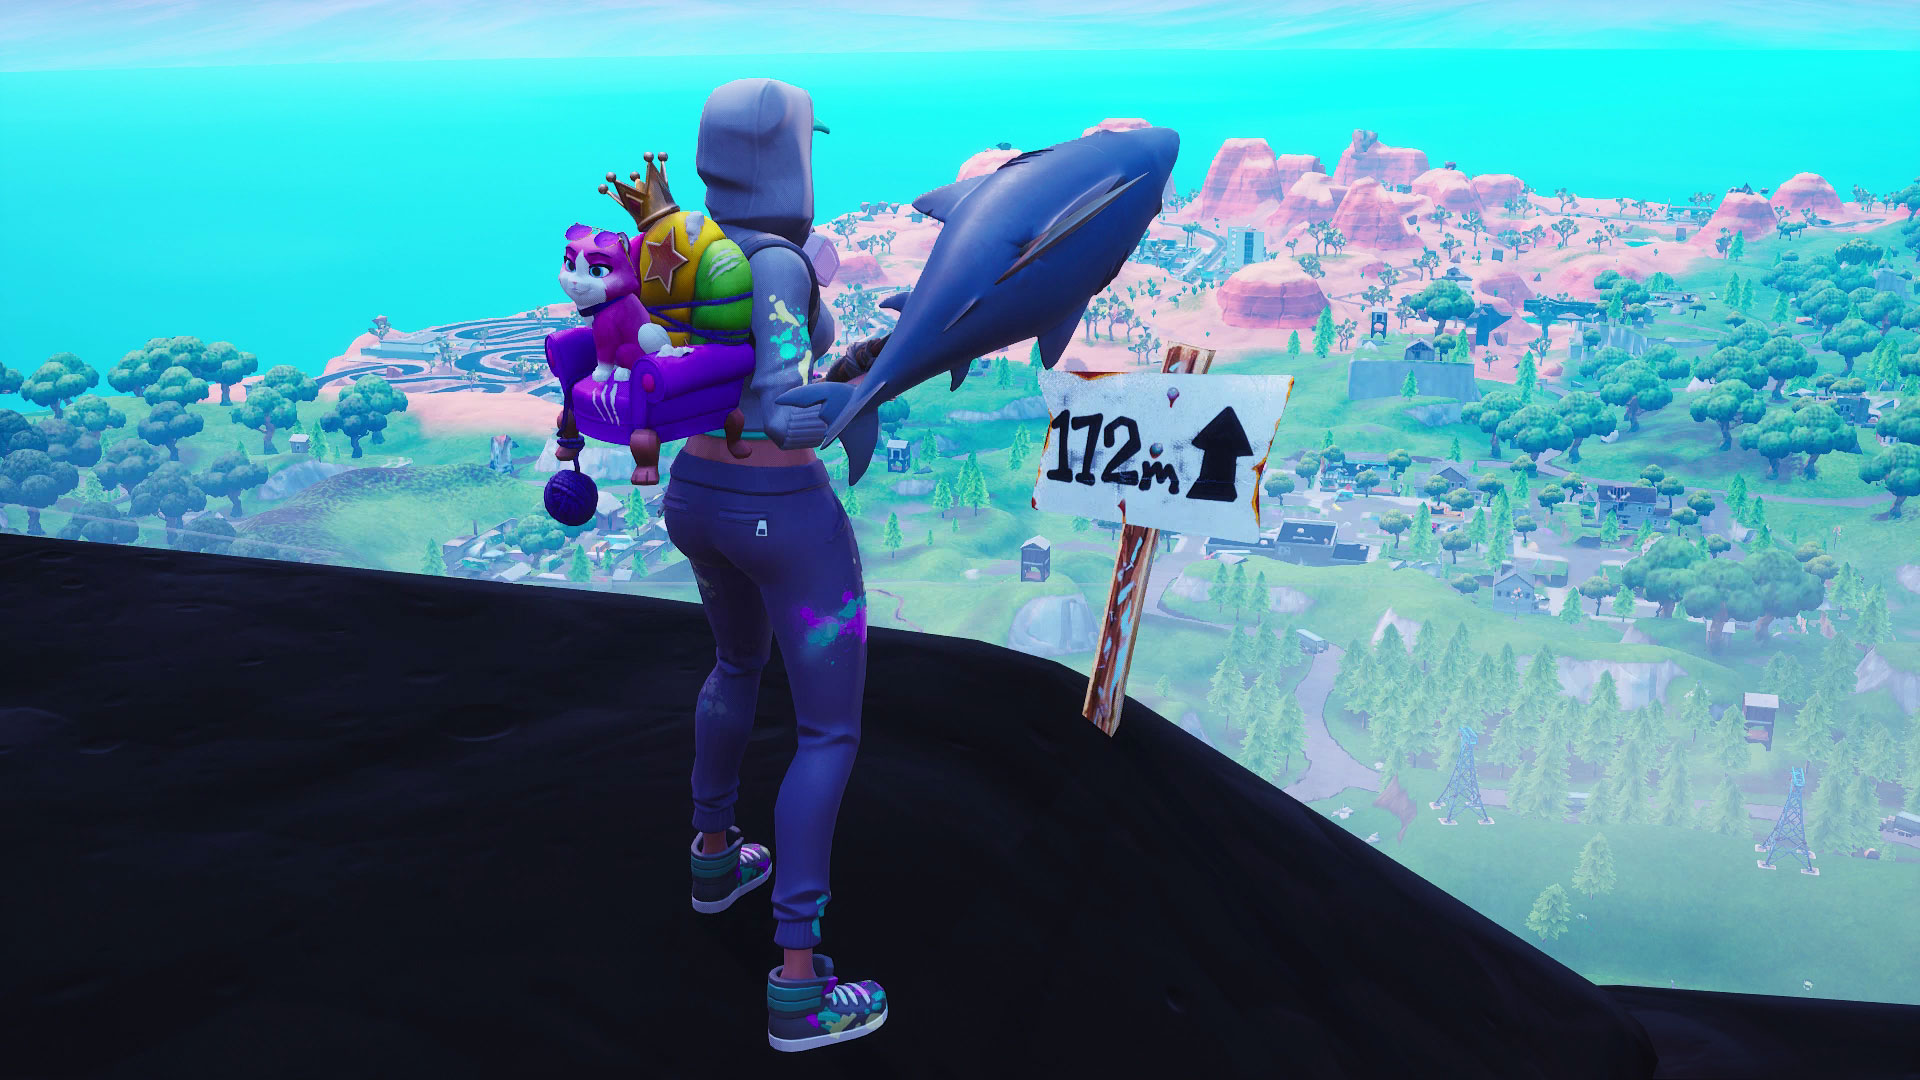 Where To Visit The 5 Highest Elevations On The Island I!   n Fortnite - where to visit the 5 highest elevations on the island in fortnite season 8 week 6 challenge gamesradar